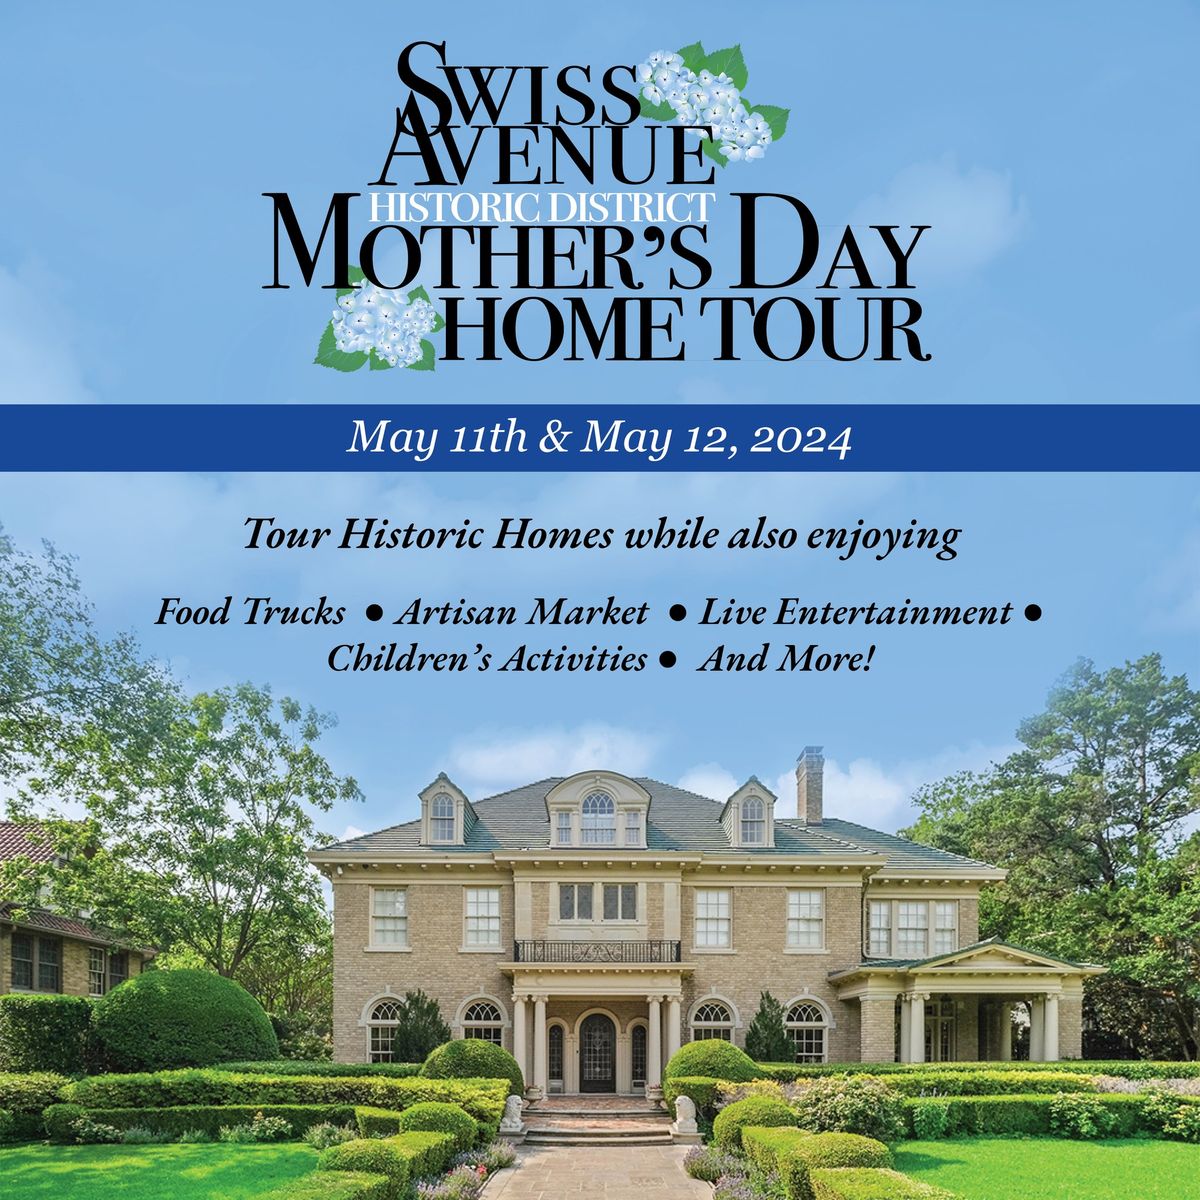 Swiss Avenue Historic District Mother's Day Home Tour